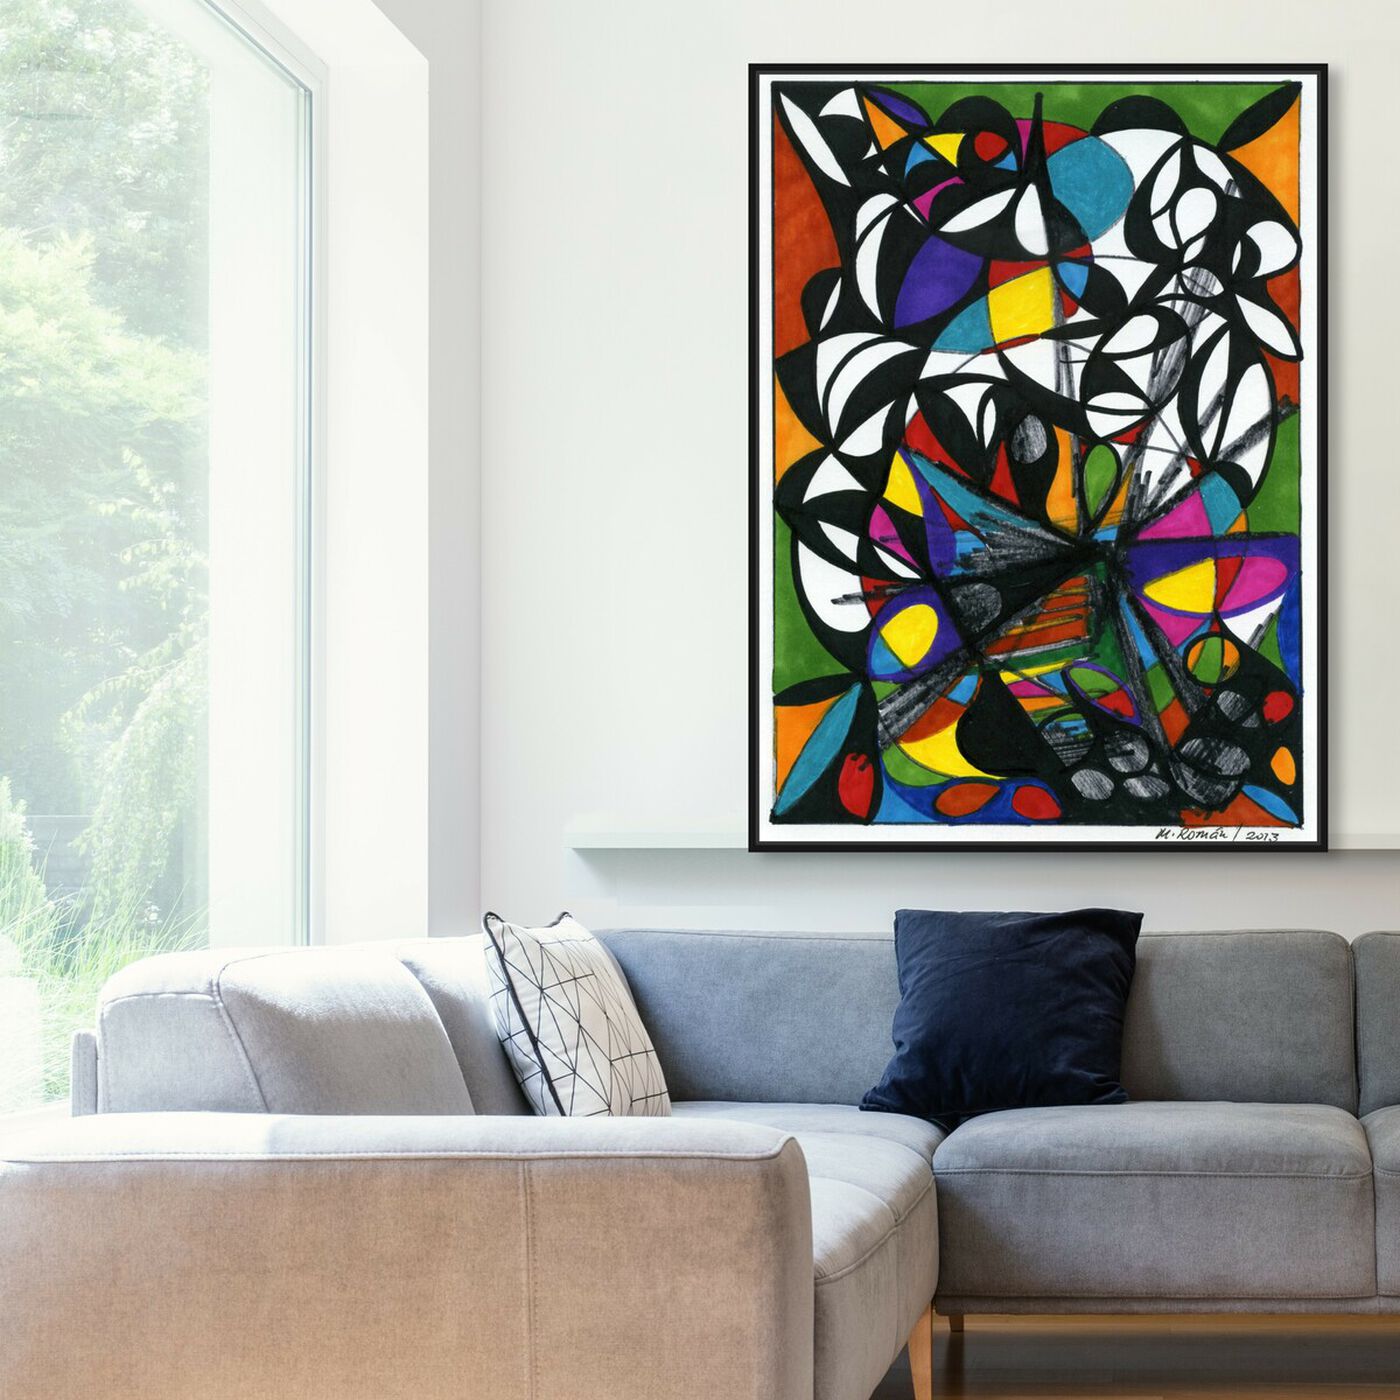 Hanging view of At Dusk featuring abstract and geometric art.